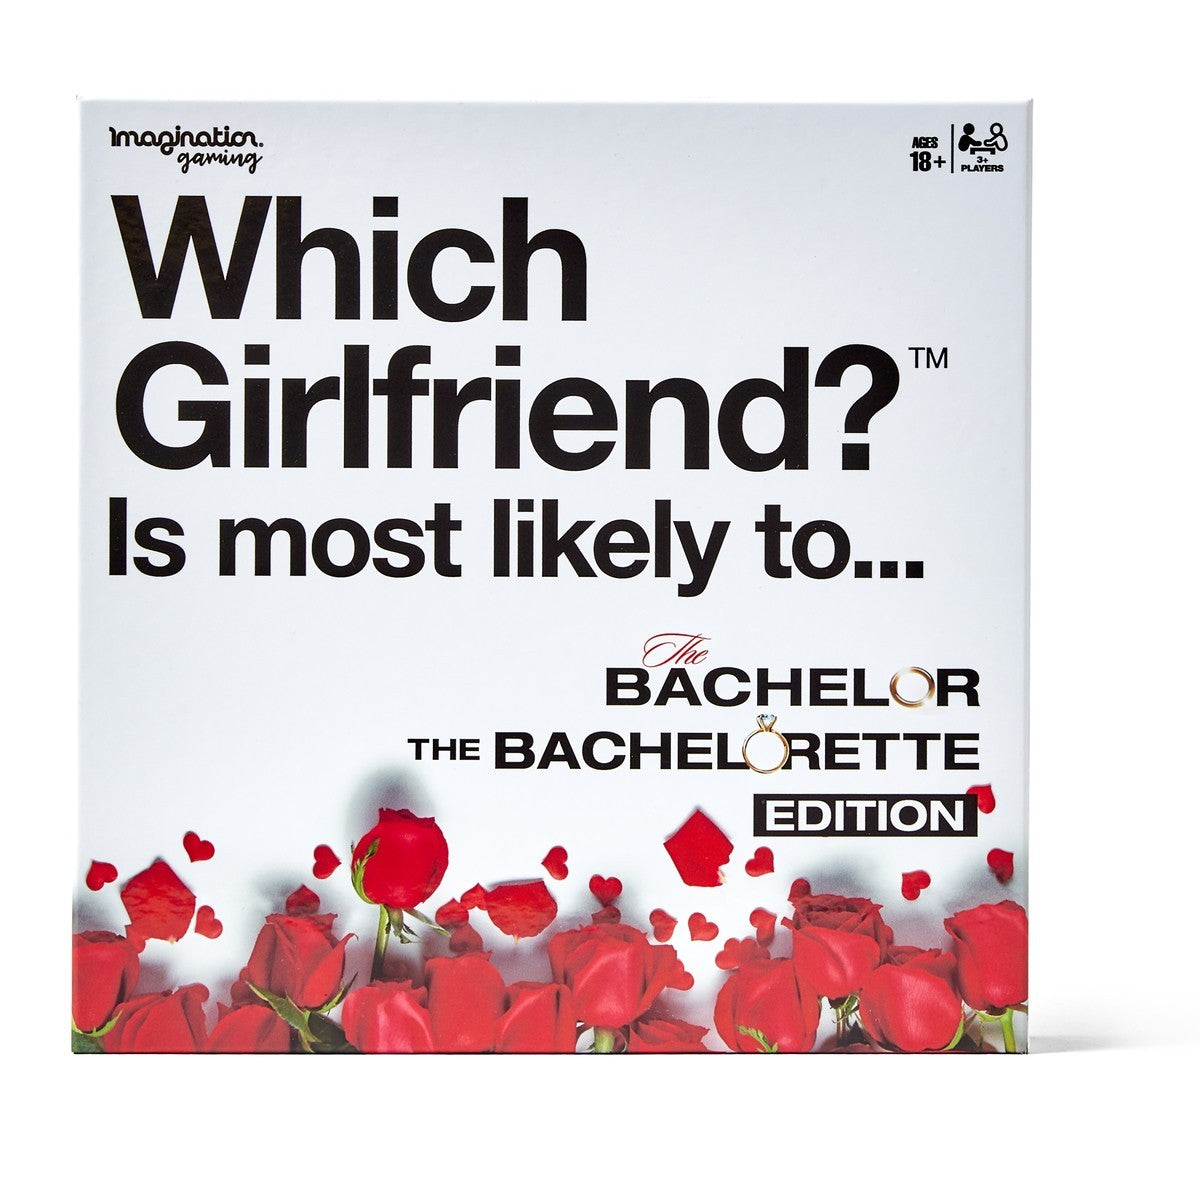 Which Girlfriend is most likely to